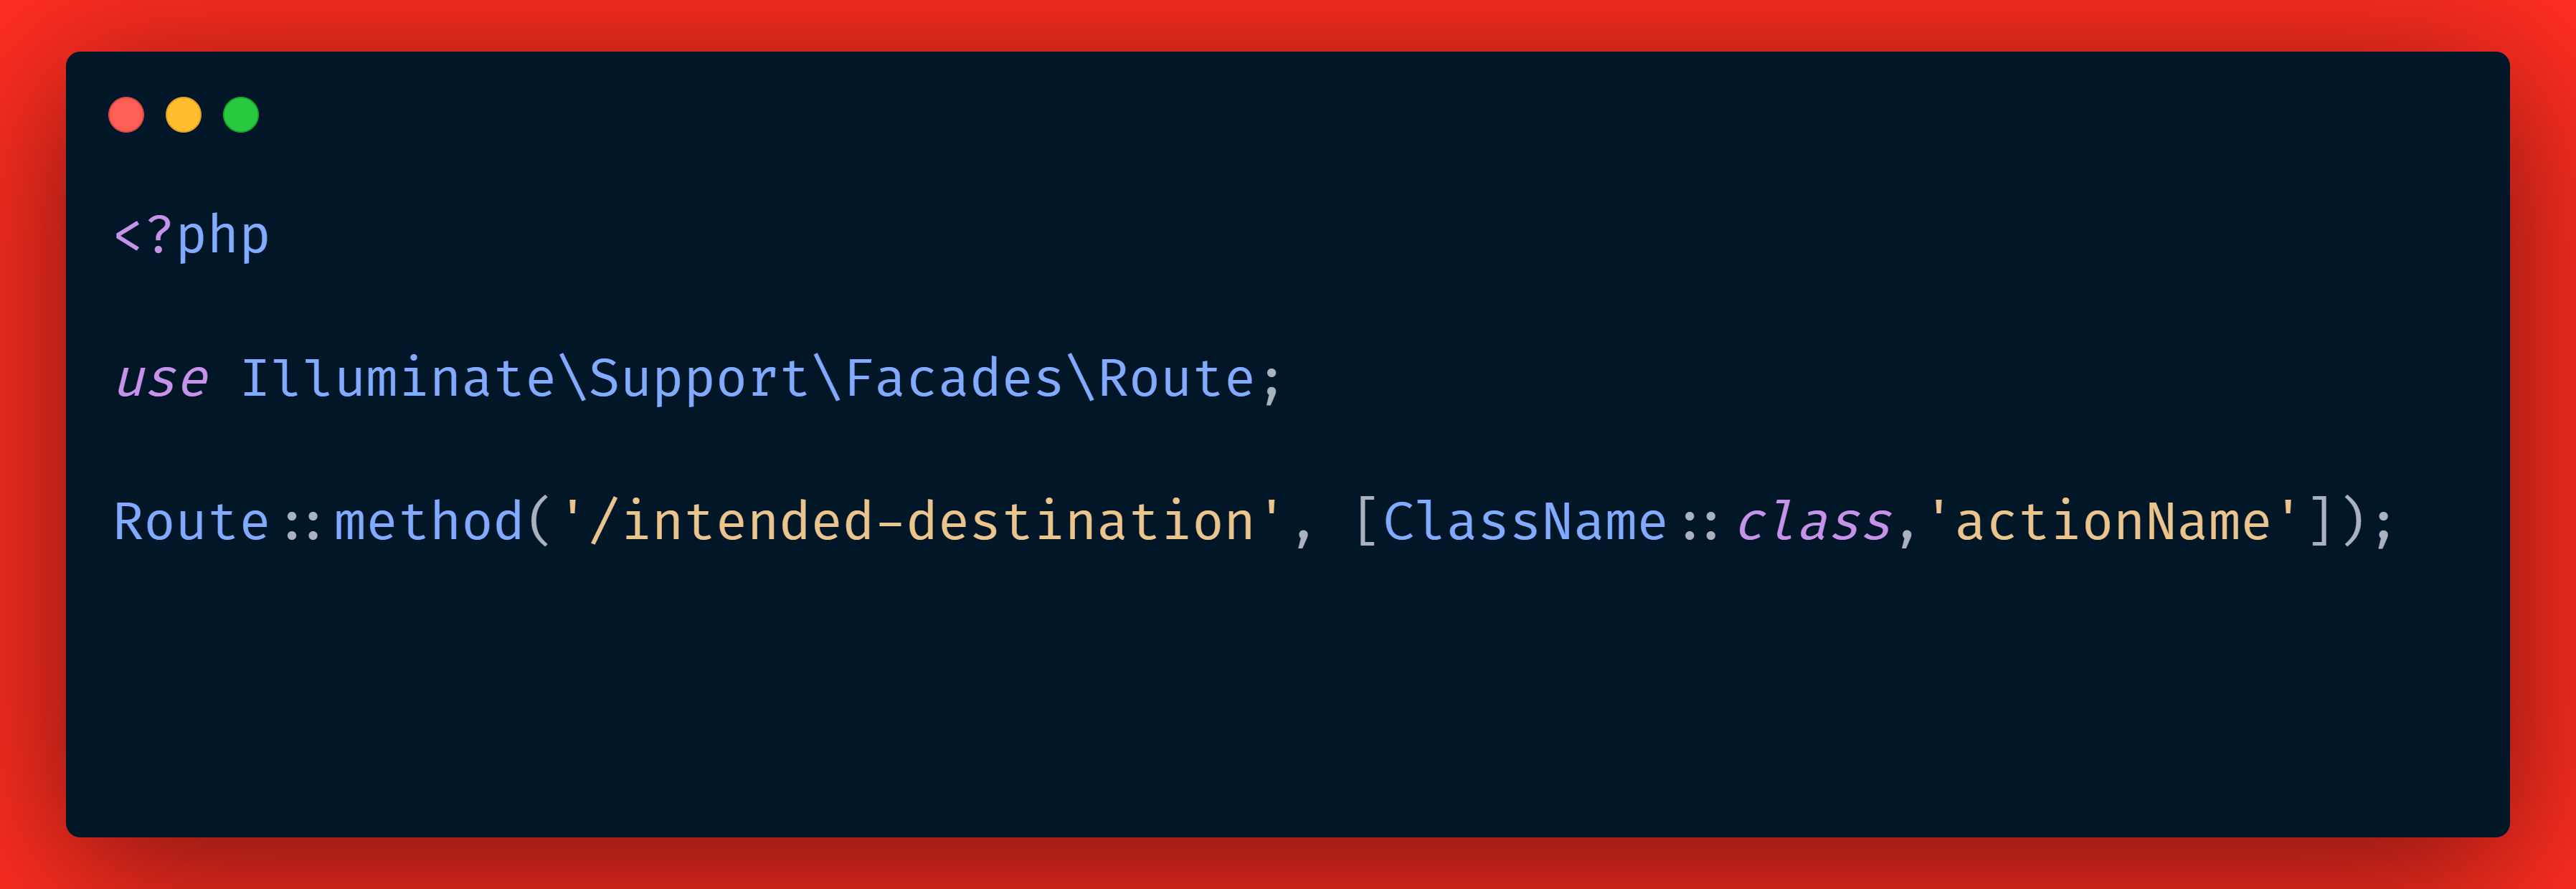 Route array example